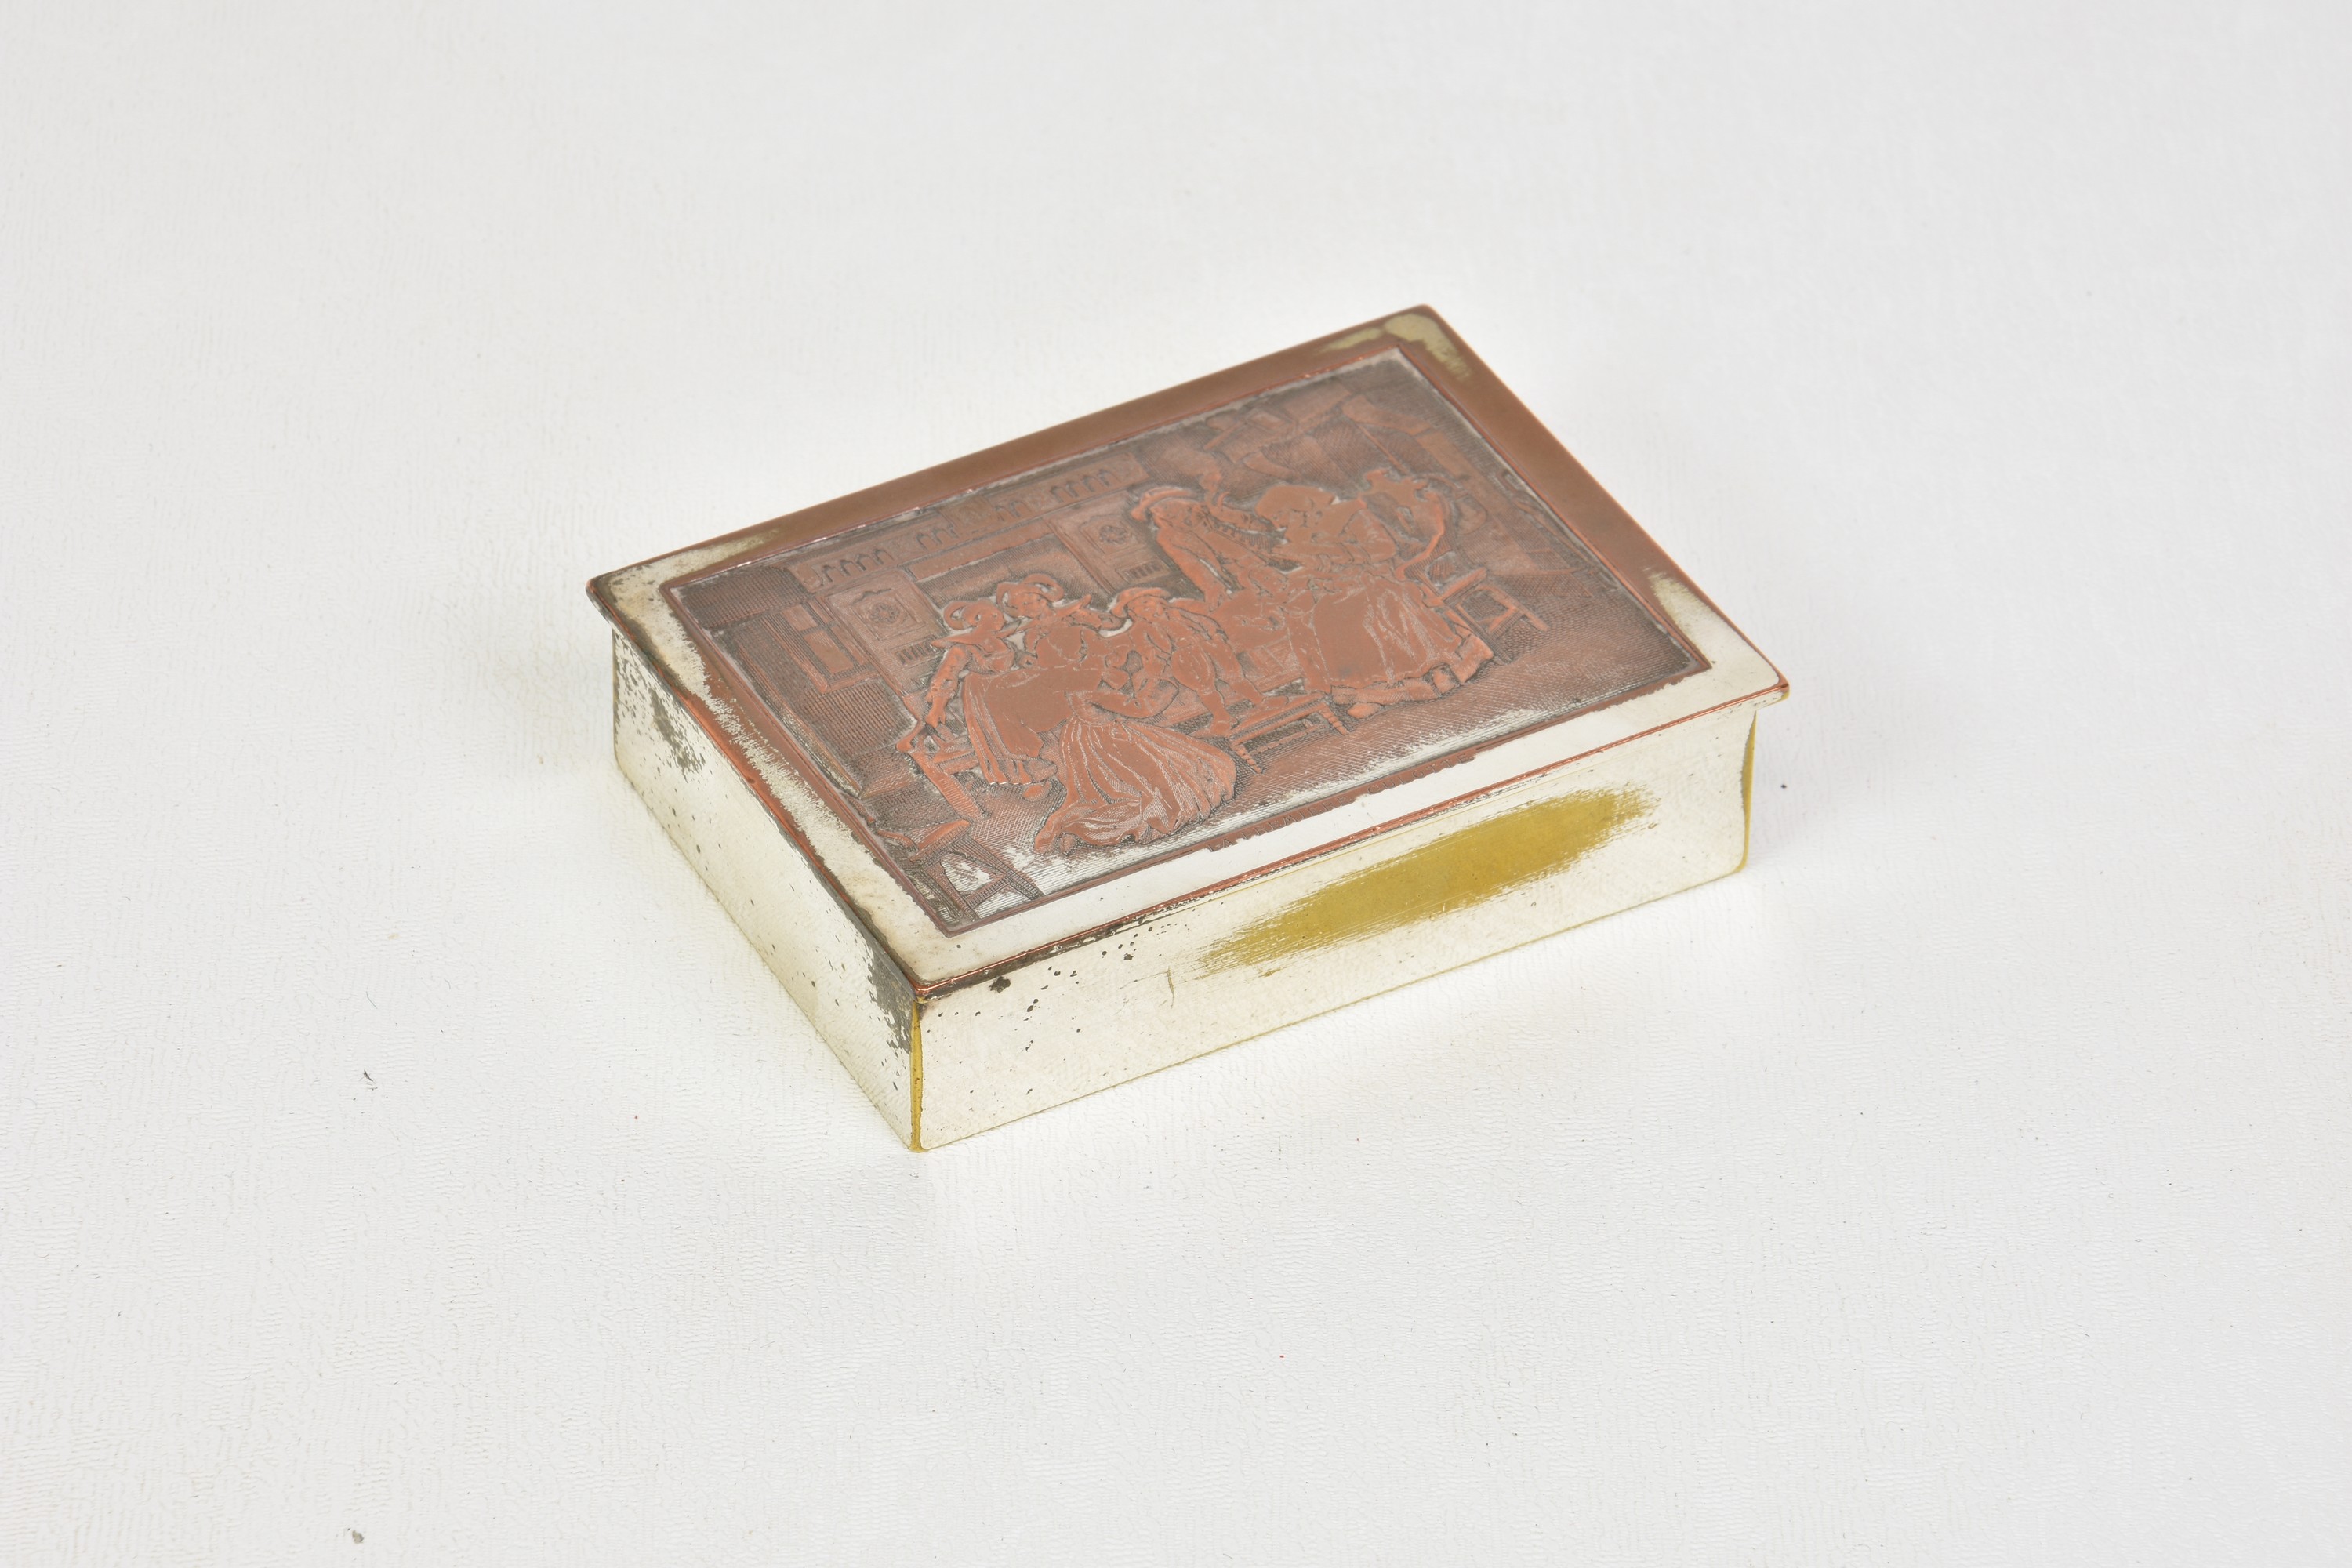 A 19th century silver plate on copper snuff box, with raised decoration of figures in a 17th century